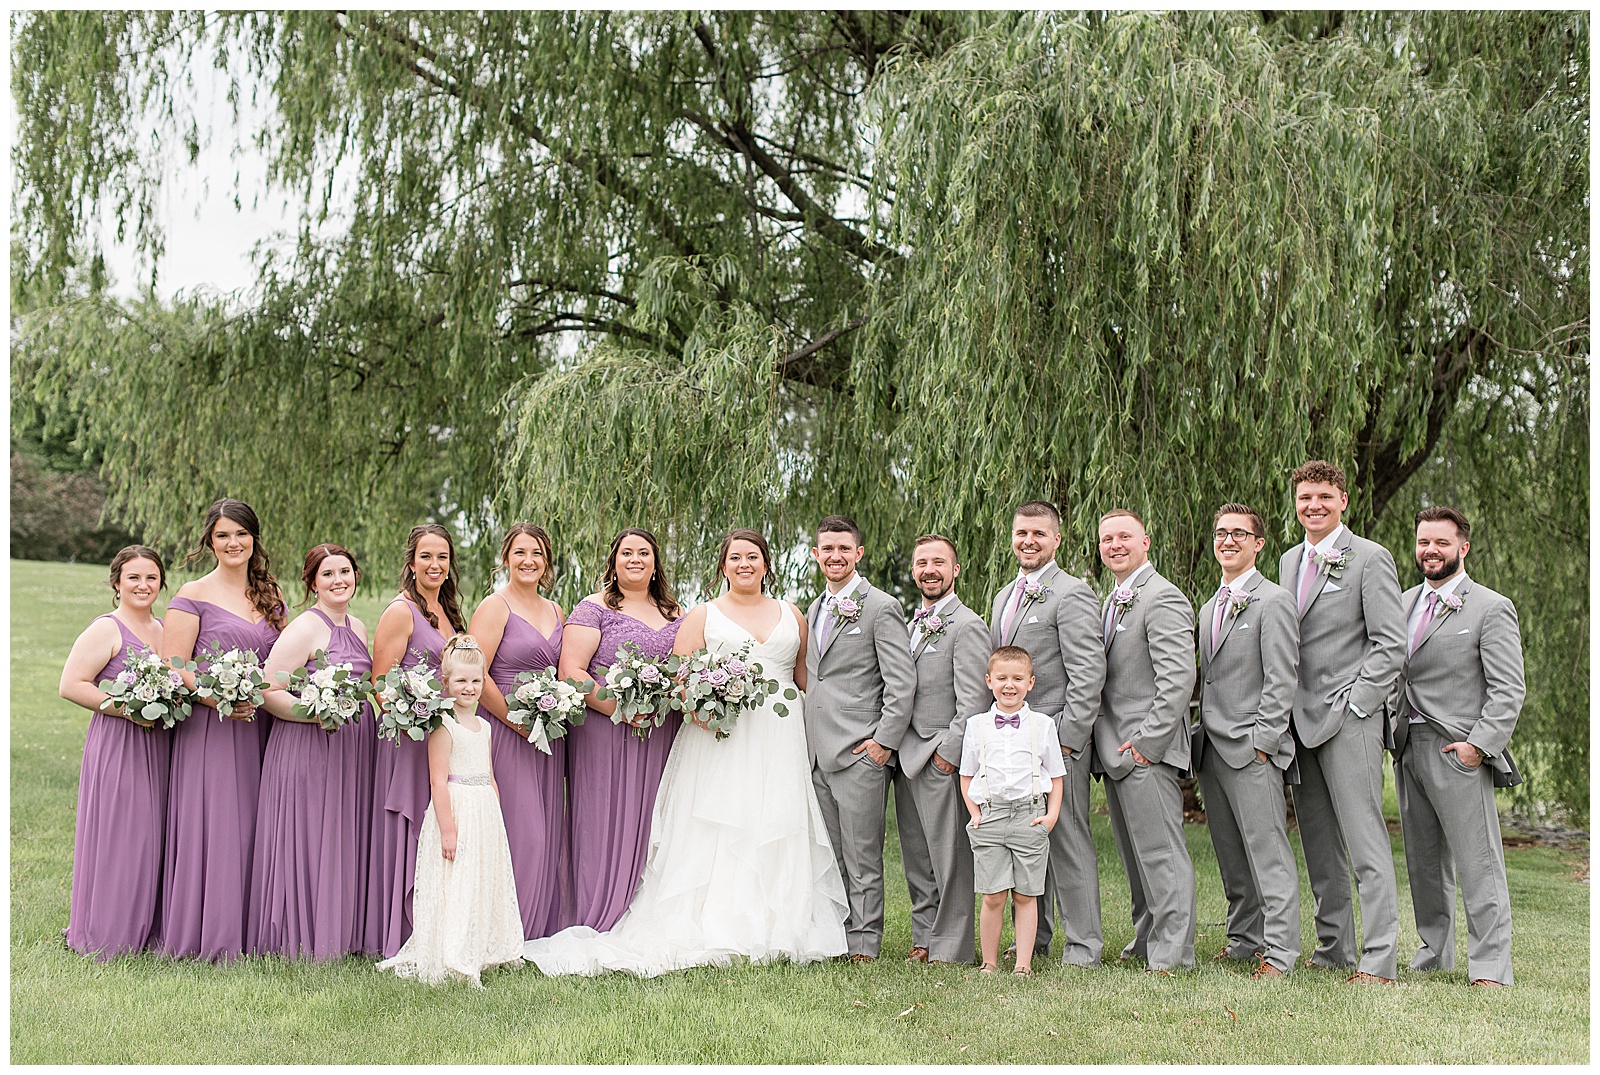 couple surrounded by wedding party in lavender dresses and light gray suits under willow tree at lakefield weddings